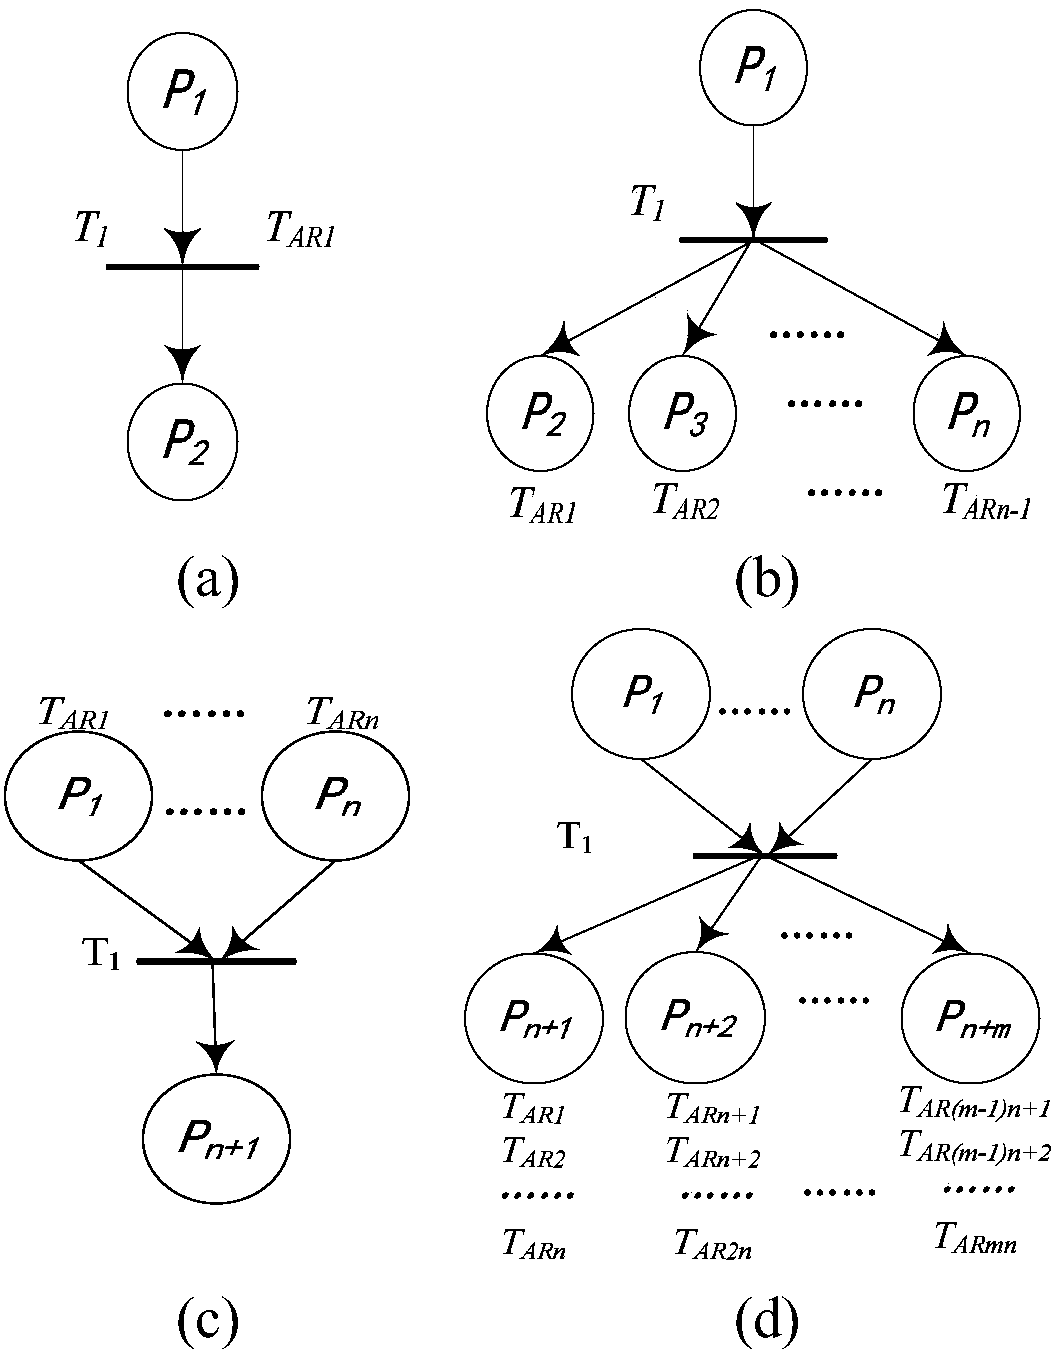 Fault diagnosis method for power grid based on improved Bayesian Petri net